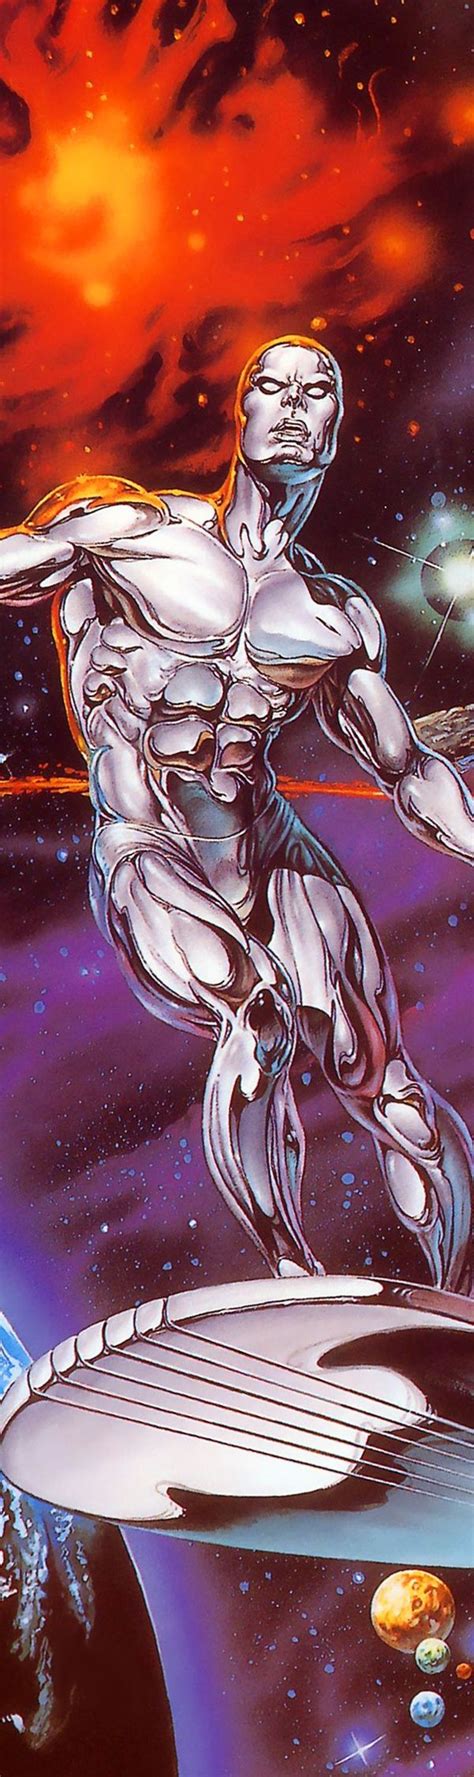 Silver Surfer Norrin Radd Is A Fictional Character A